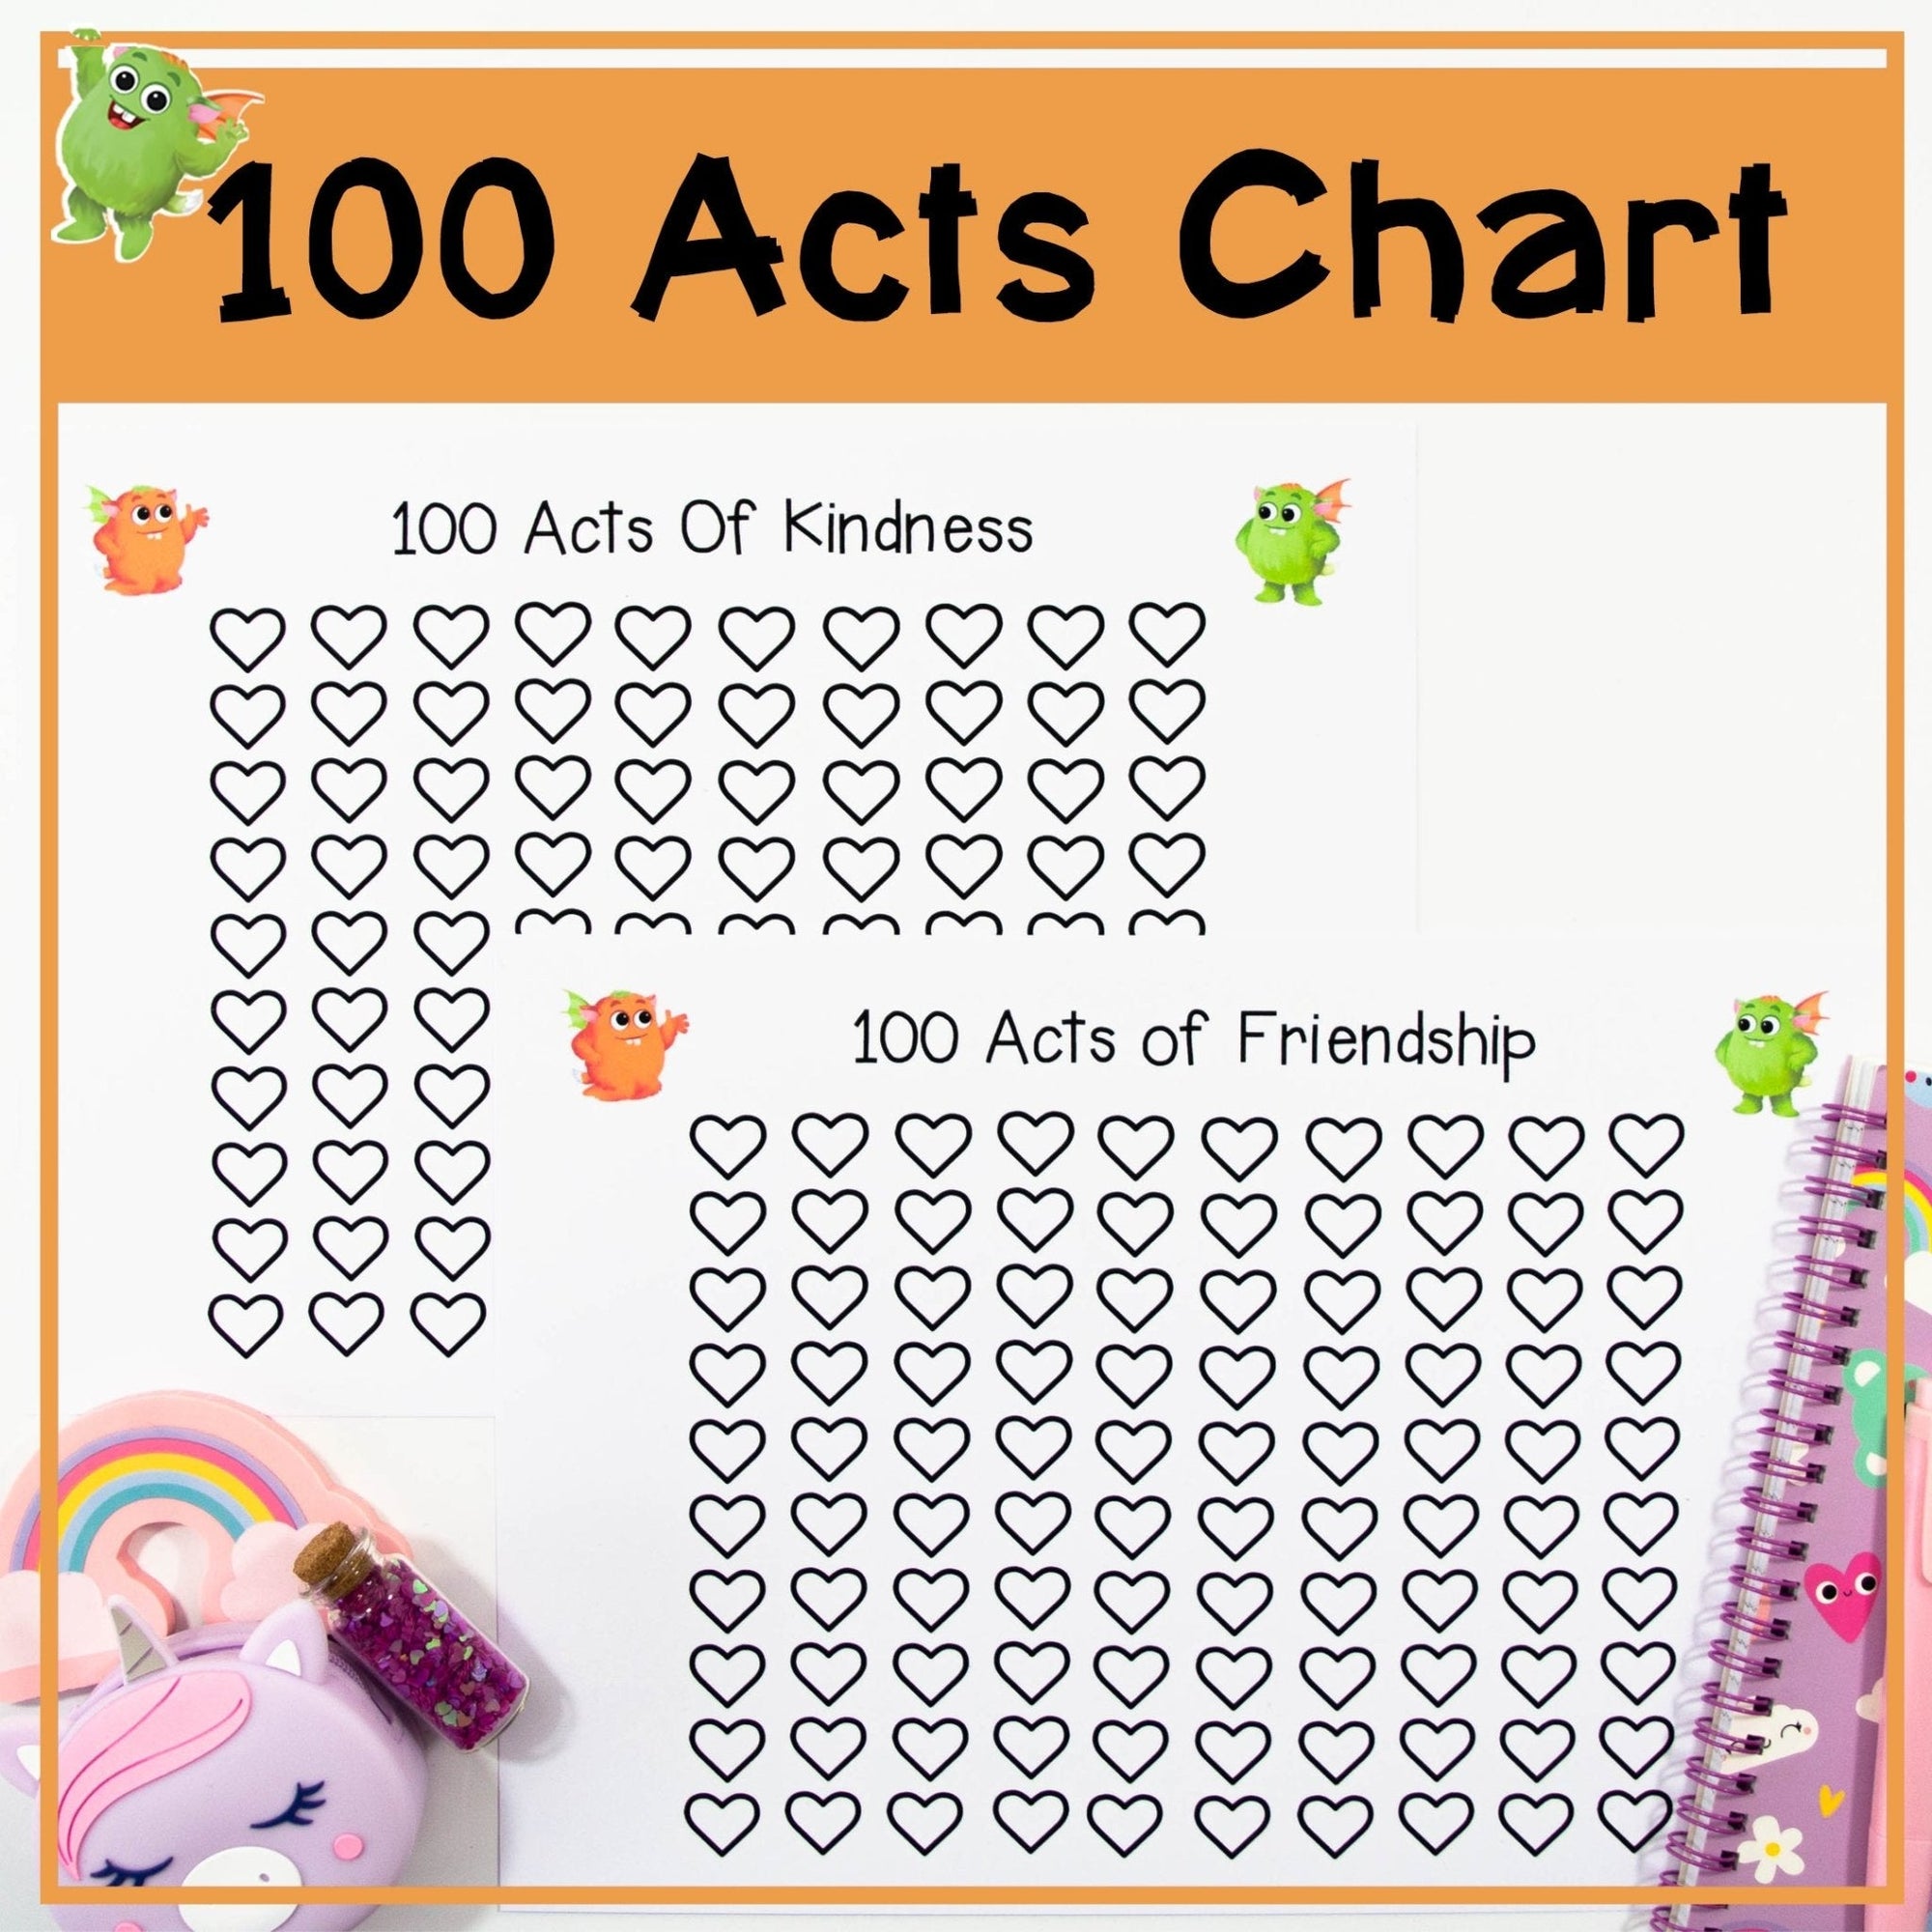 100 Acts Of Kindness Chart & 100 Acts Of Friendship Chart - Your Teacher's Pet Creature